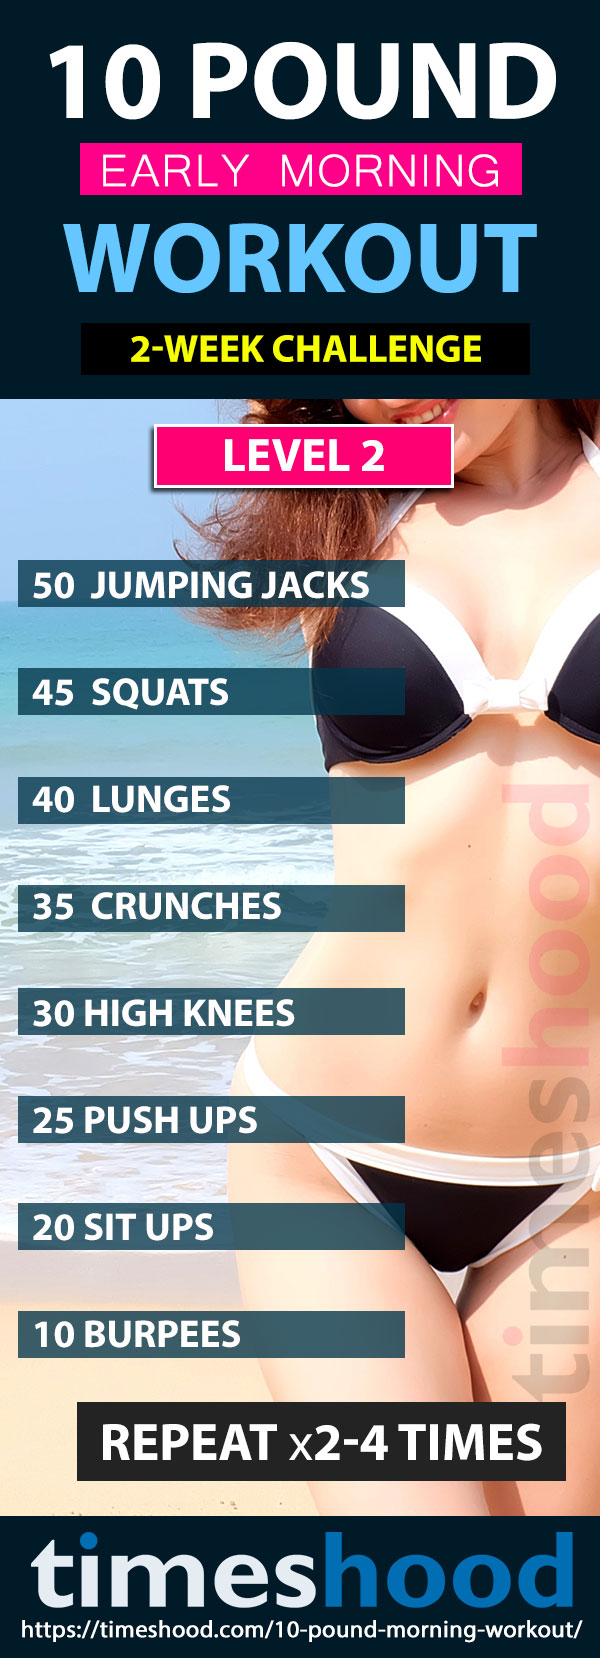 Lose 10 pounds in 2 weeks with this morning workouts plan. Best weight loss plan for women. Sexy figure and slim down workouts ideas for women. Slim down challenge workouts. Lose 30 pounds in 3 weeks. Easy weight loss workouts for fat burning. 10 pound morning workouts for women. Weight loss tips to lose 10 pounds. 